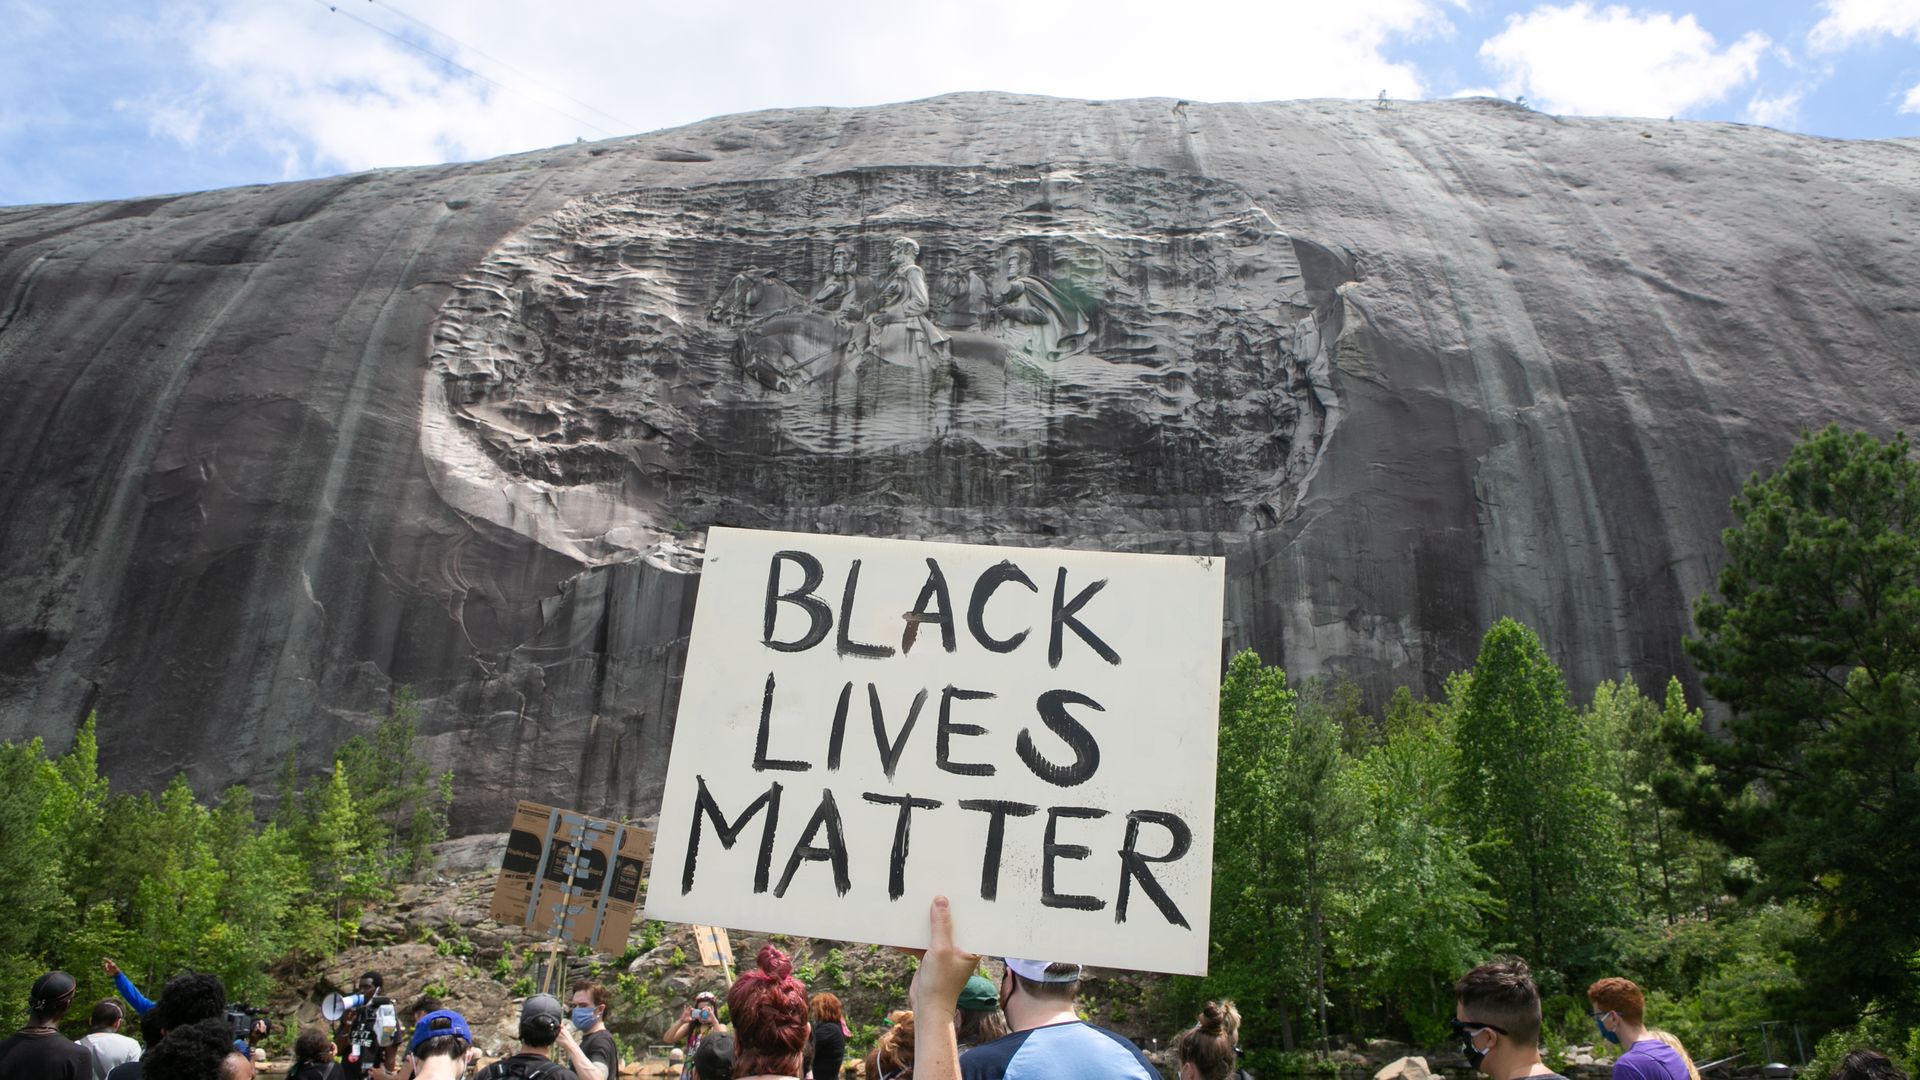 An activist holds a Black Lives Matter sign in front of Stone Mountain's sculpture of Confederate generals during a protest